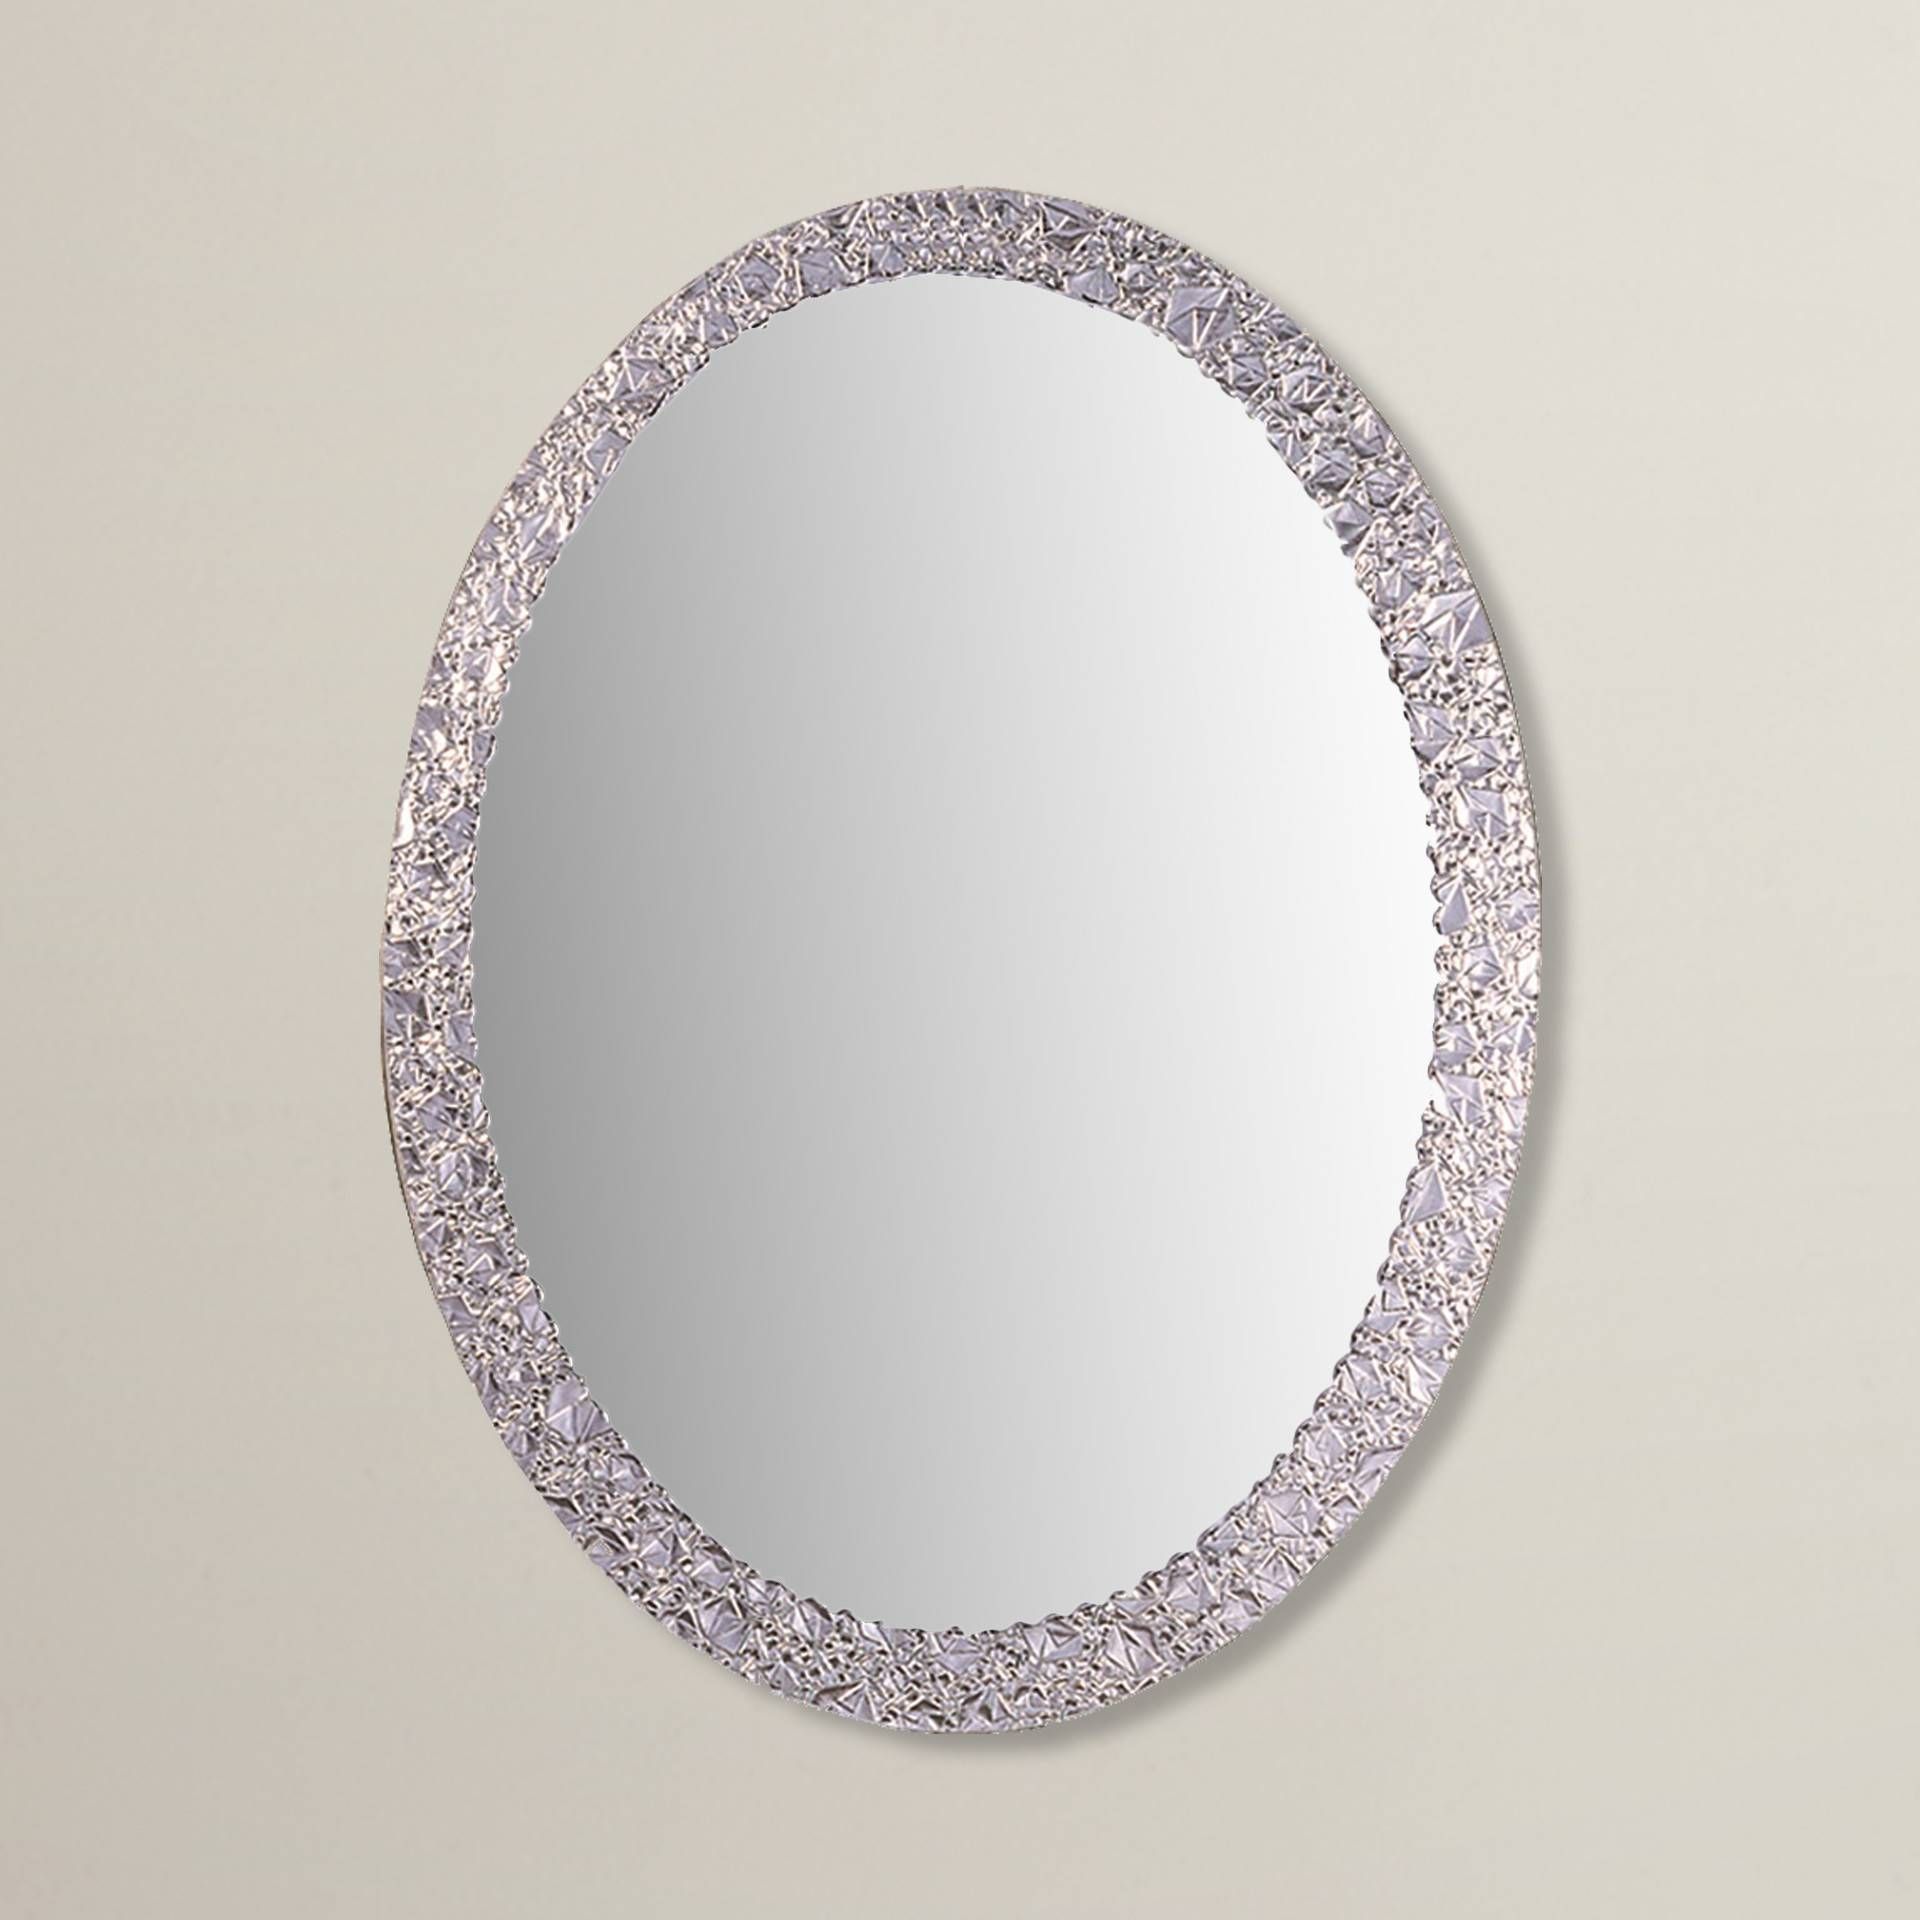 Crystal Wall Mirror | Shoe800 Pertaining To Wall Mirrors With Crystals (View 9 of 25)